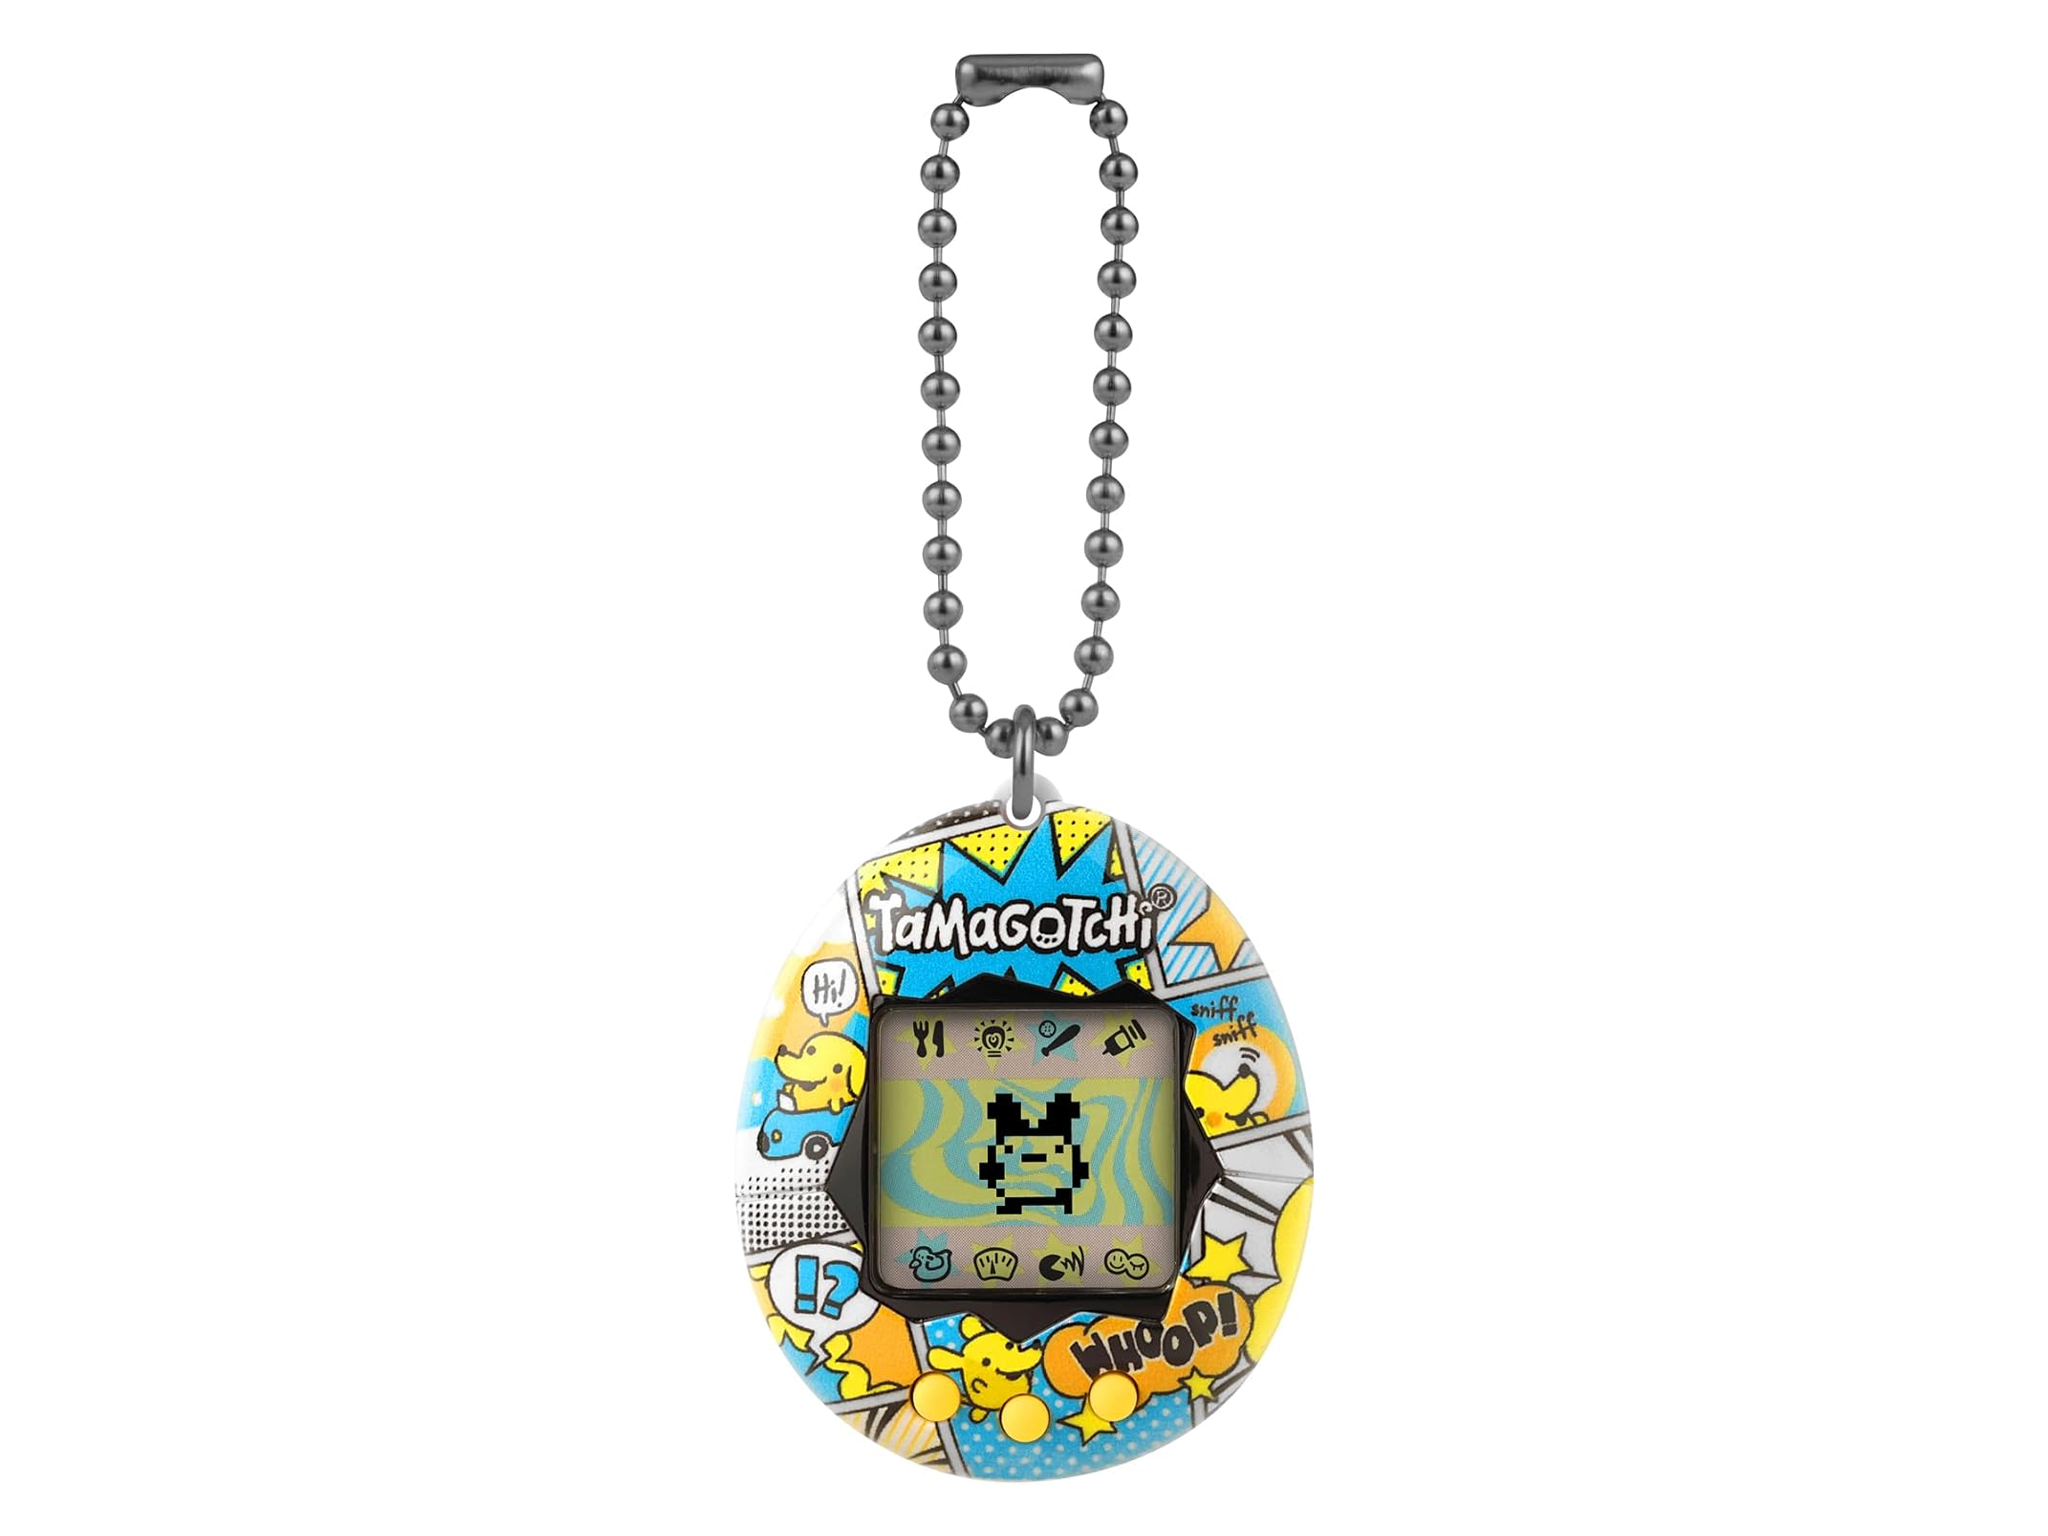 Tamagotchi-best-gifts-for-8-year-olds-review-indybest